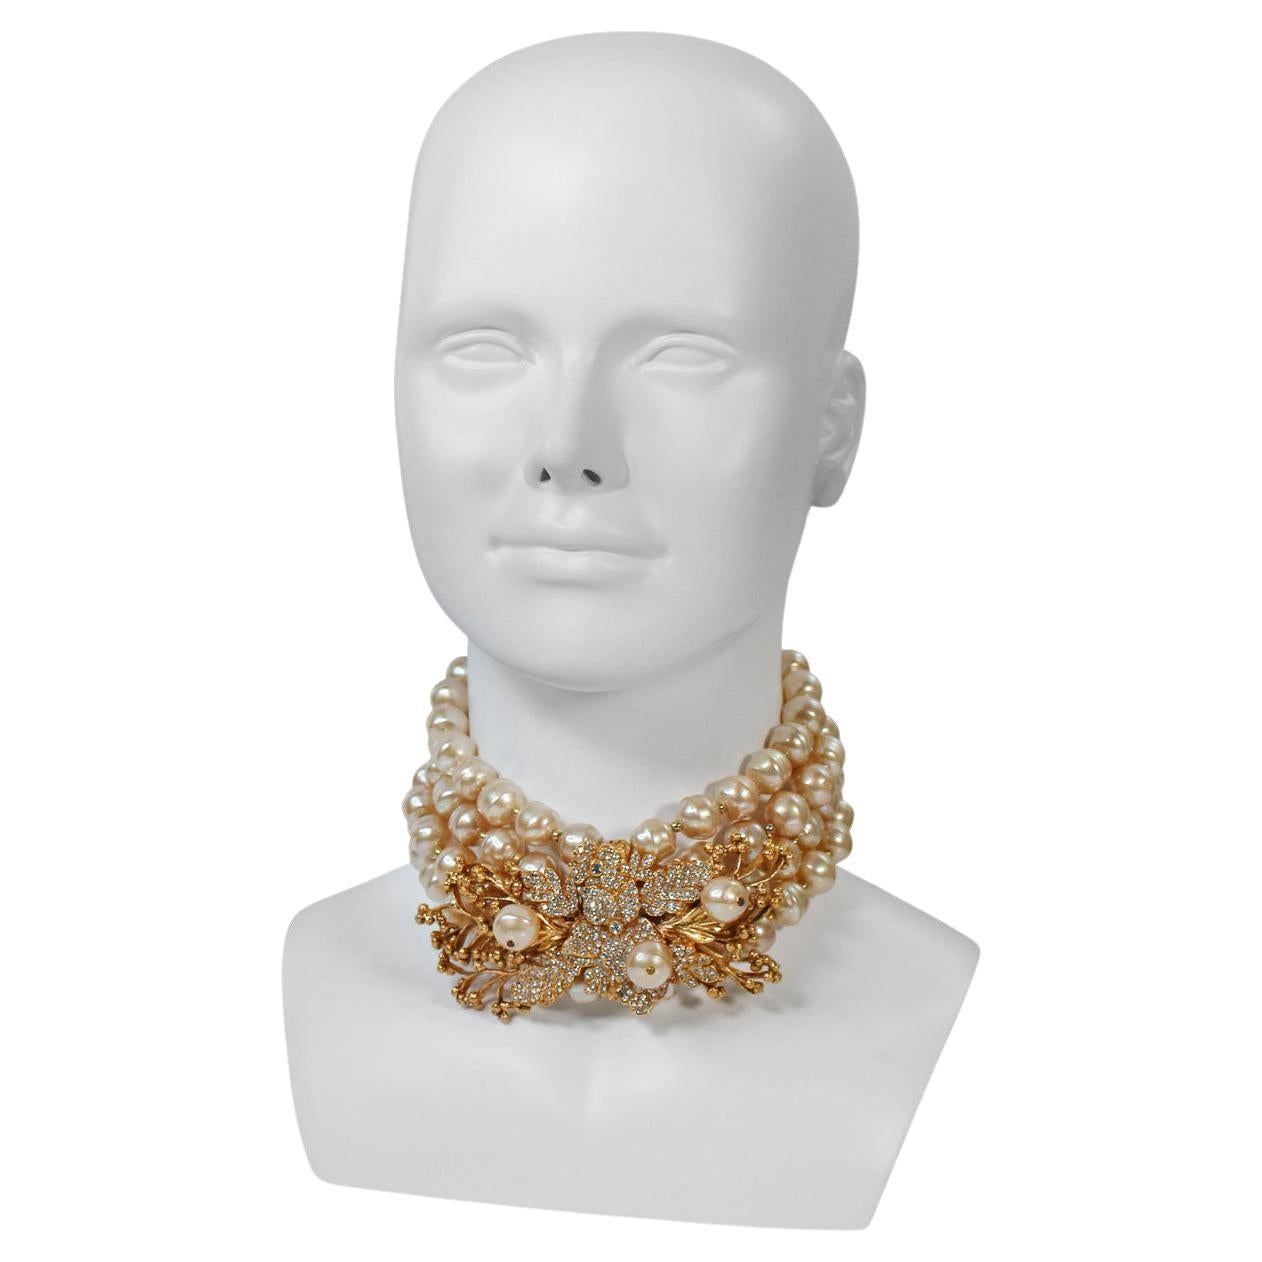 Vintage Christian Dior Couture Gold Tone with Rhinestone and Pearl Choker with Large Medallion Like Piece on Front in Middle on Top of four rows of Pearls. There are two rows of Chain to Close at Back but it is possible that two rows of additional